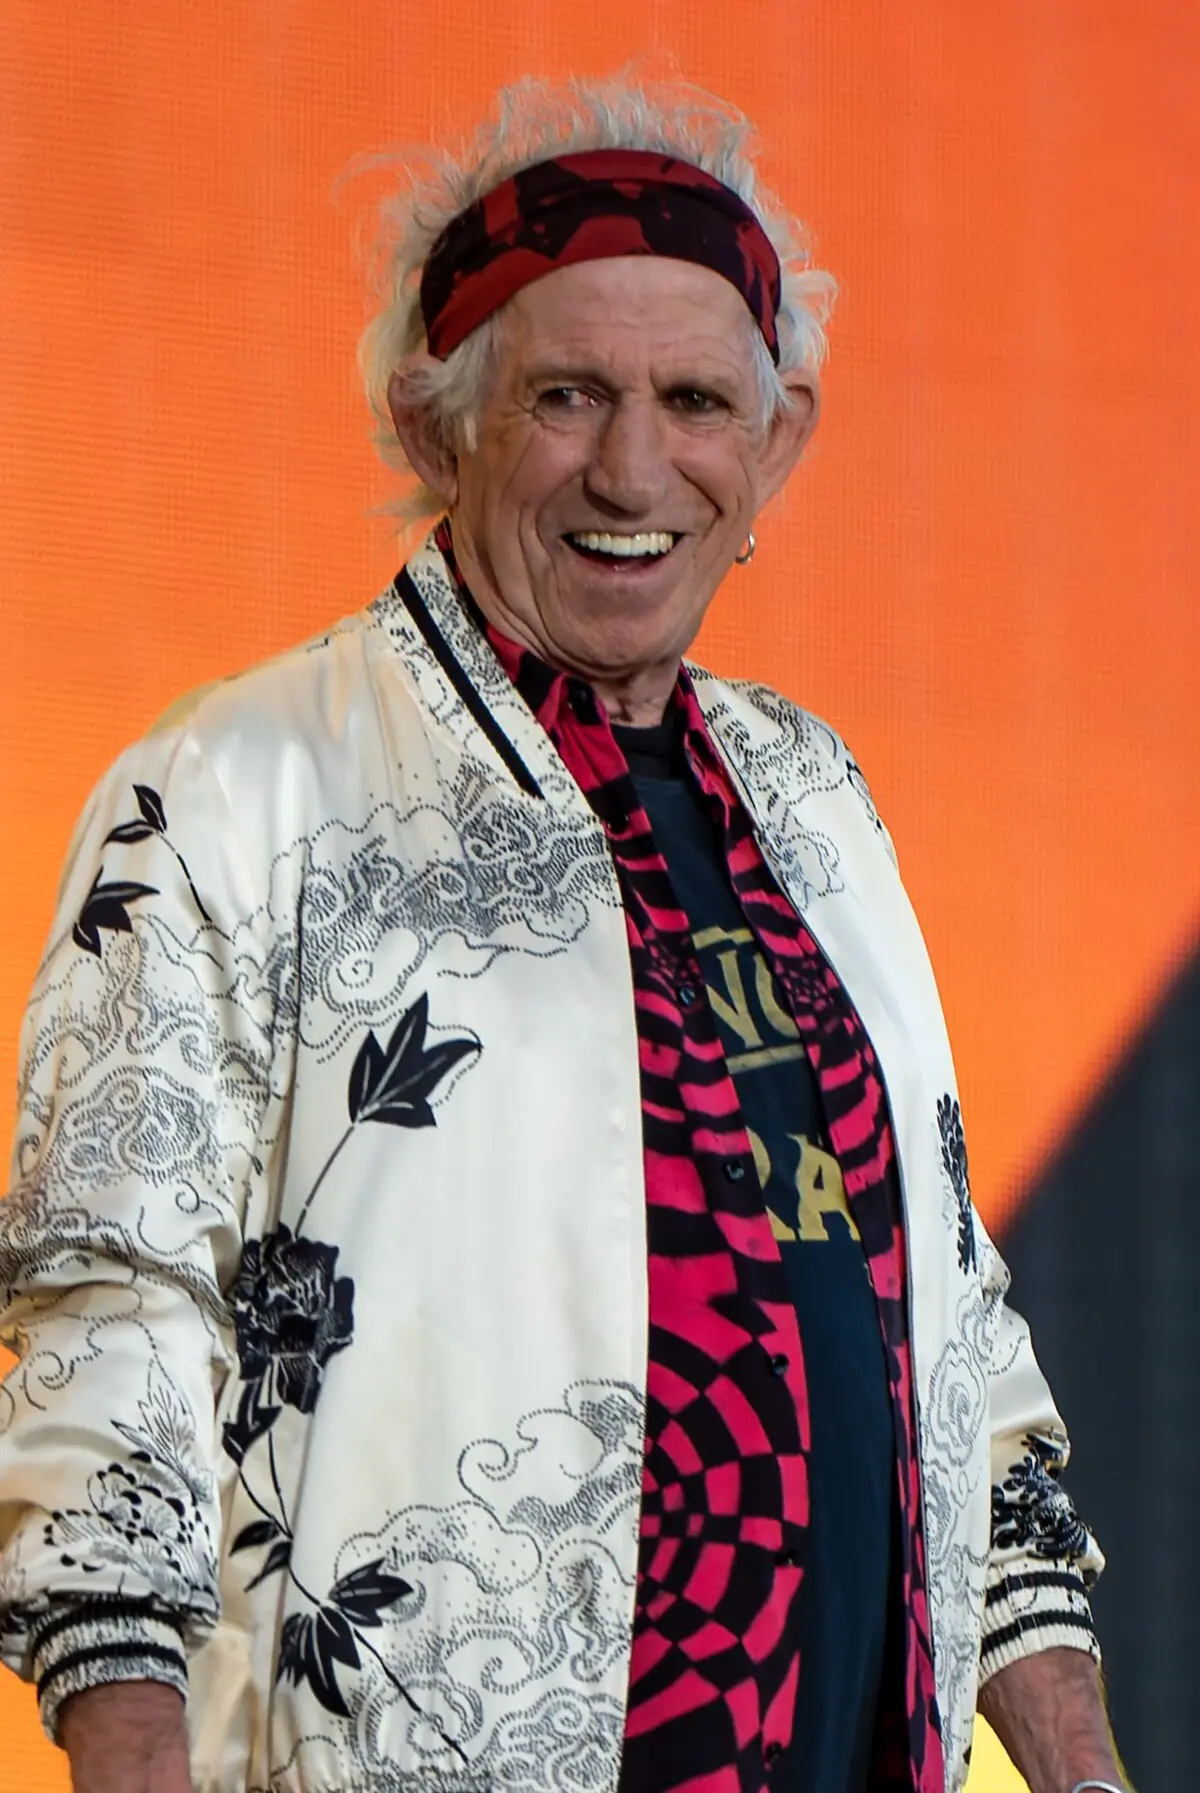 Keith Richards: Rock 'n' Roll Legend & Controversial Ashes Incident ...